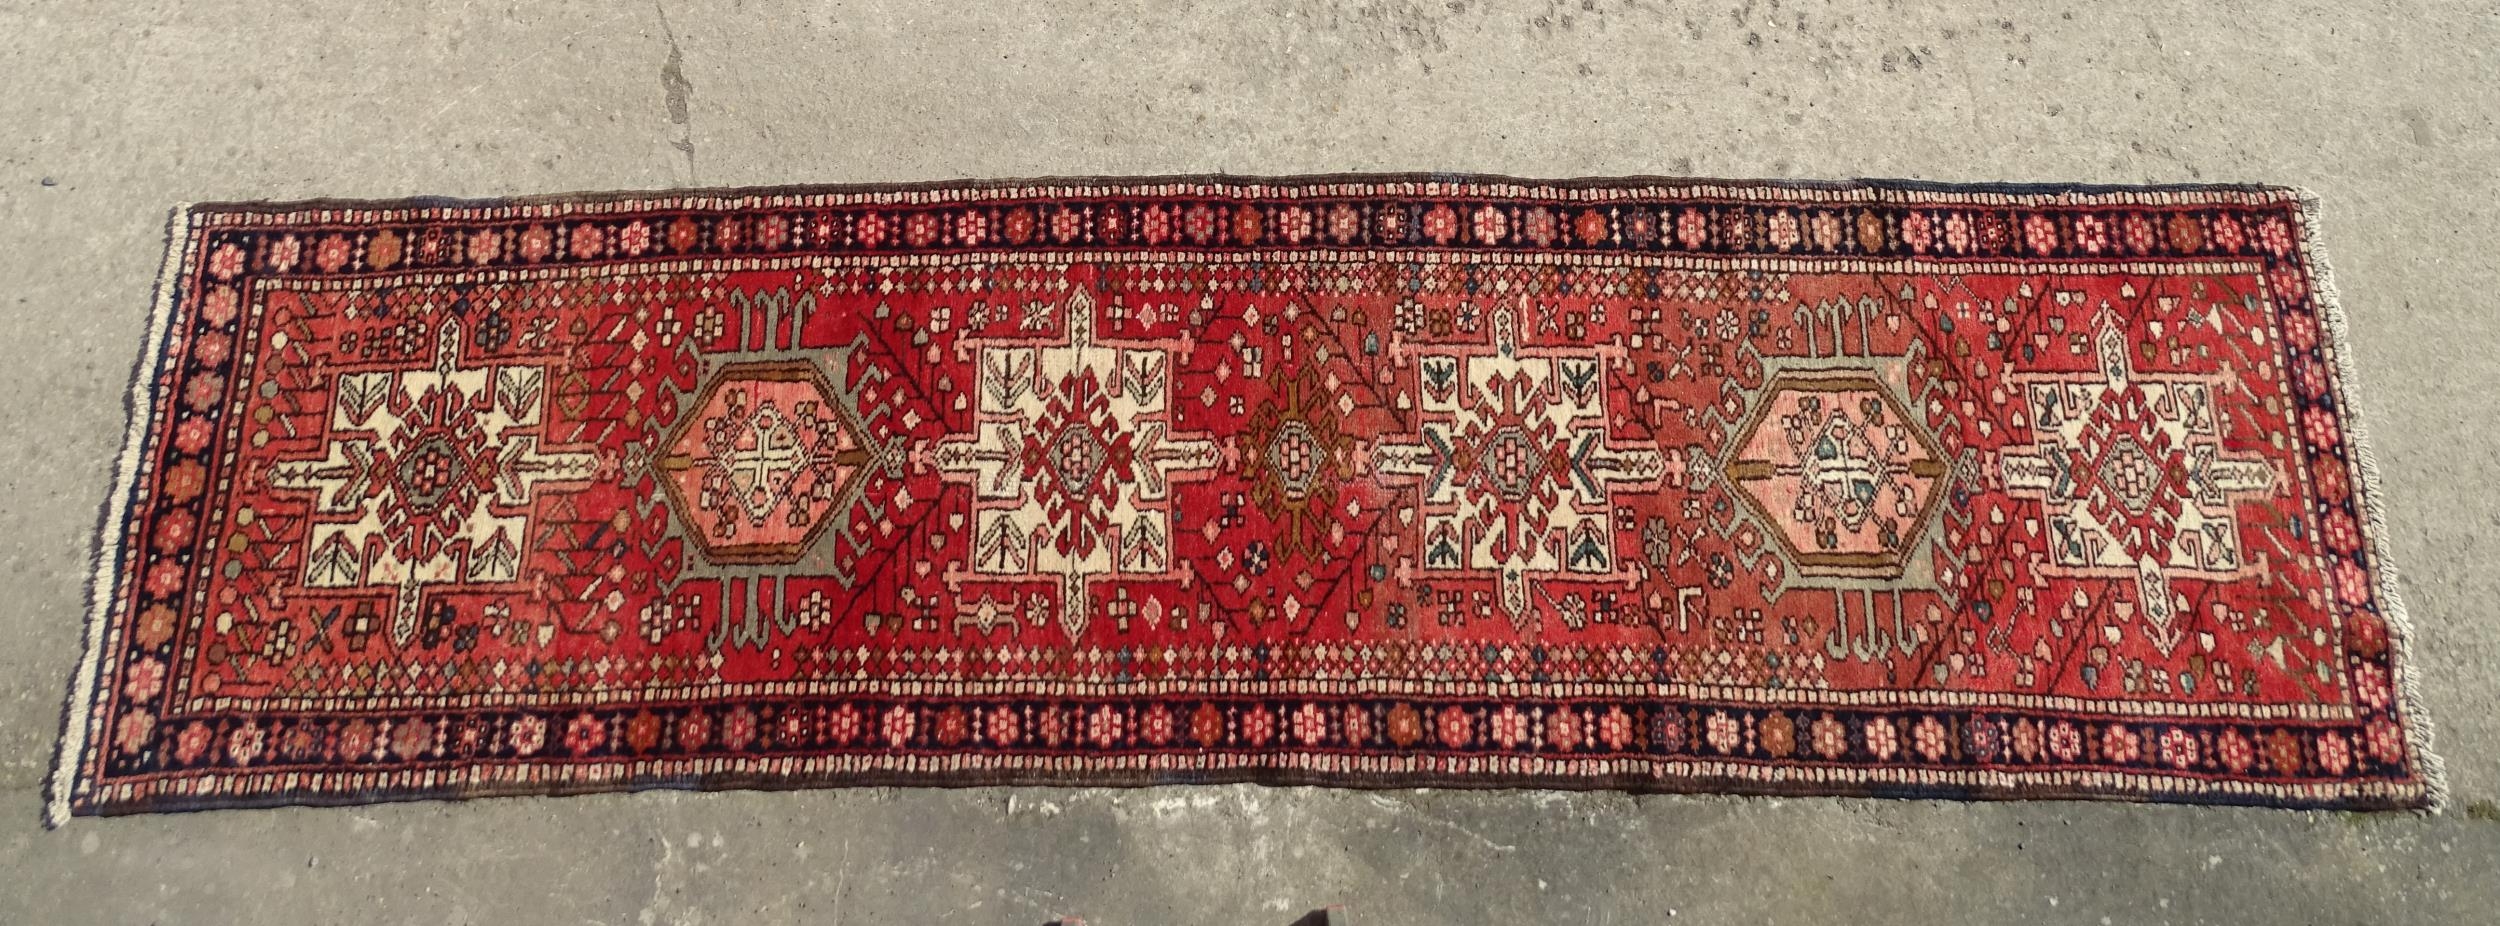 Carpet / Rug : A North West Persian Heriz runner with red ground having central medallions with - Image 2 of 8